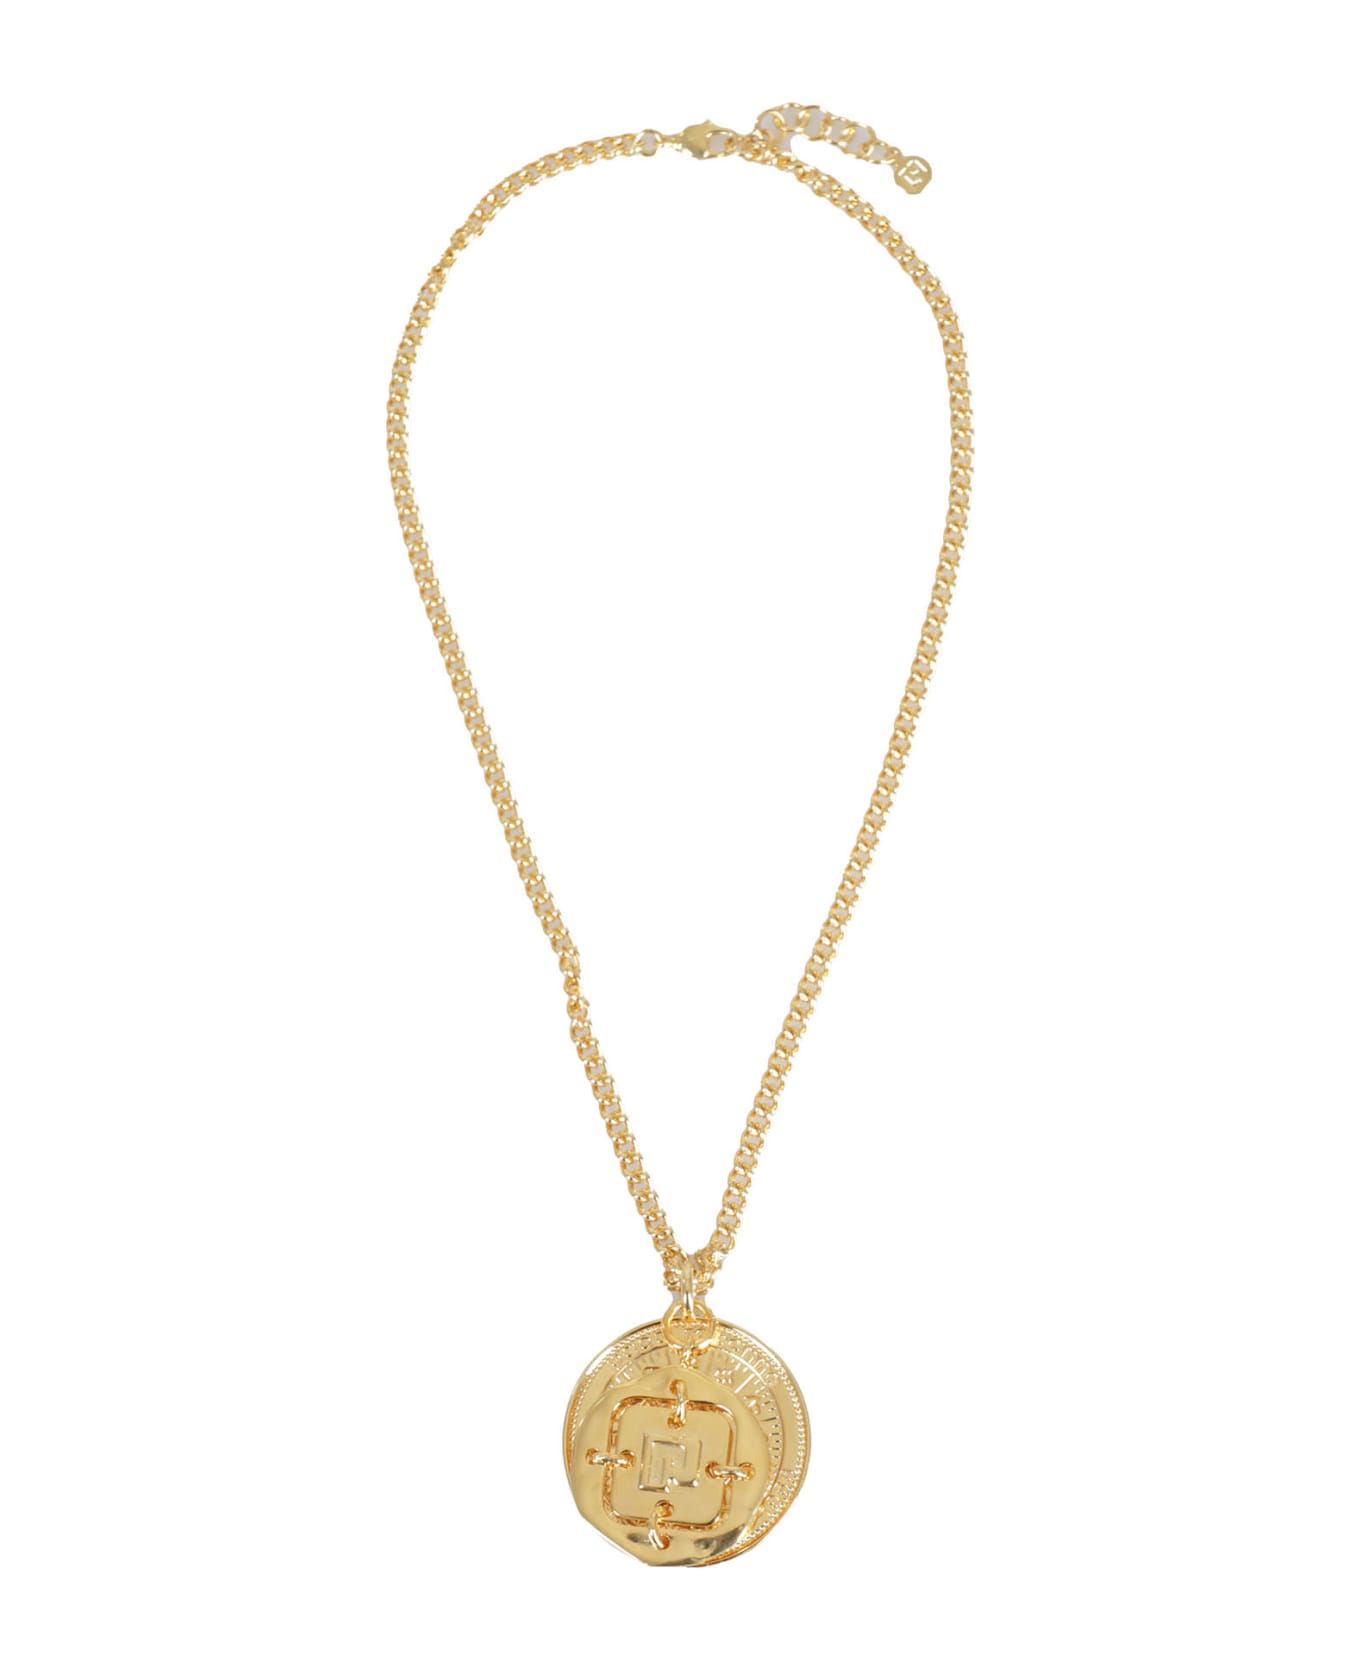 Paco Rabanne Long Necklace - Gold